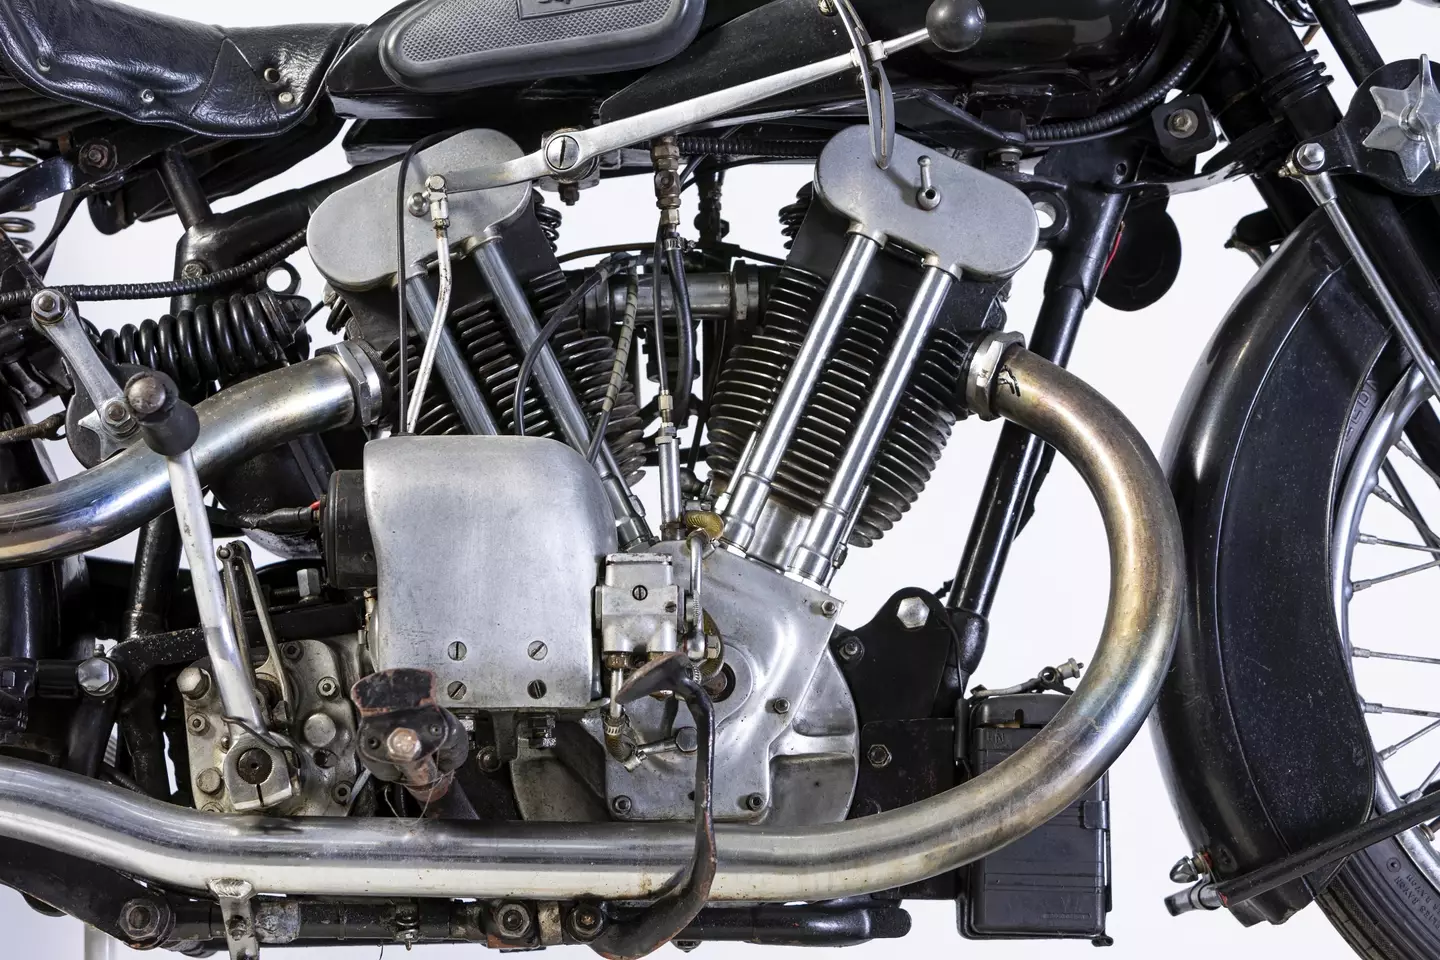 The Brough Superior SS100's new owner will have to spend some money restoring it if they want to take it out on the road again.